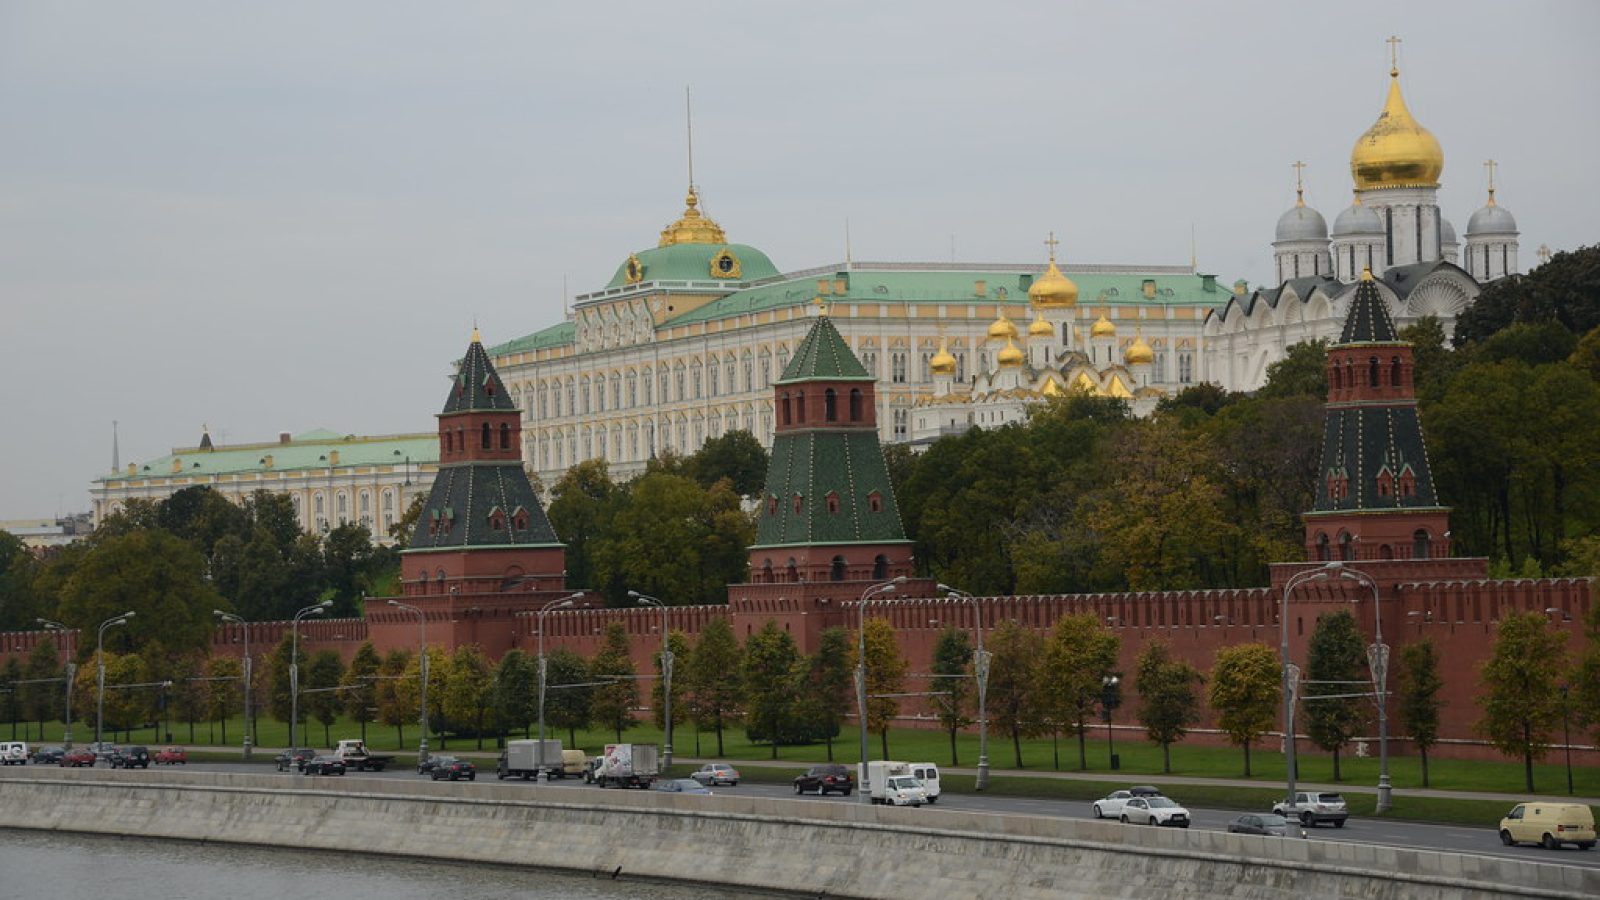 The Grand Kremlin Palace and Cathedral Square within the Kremlin